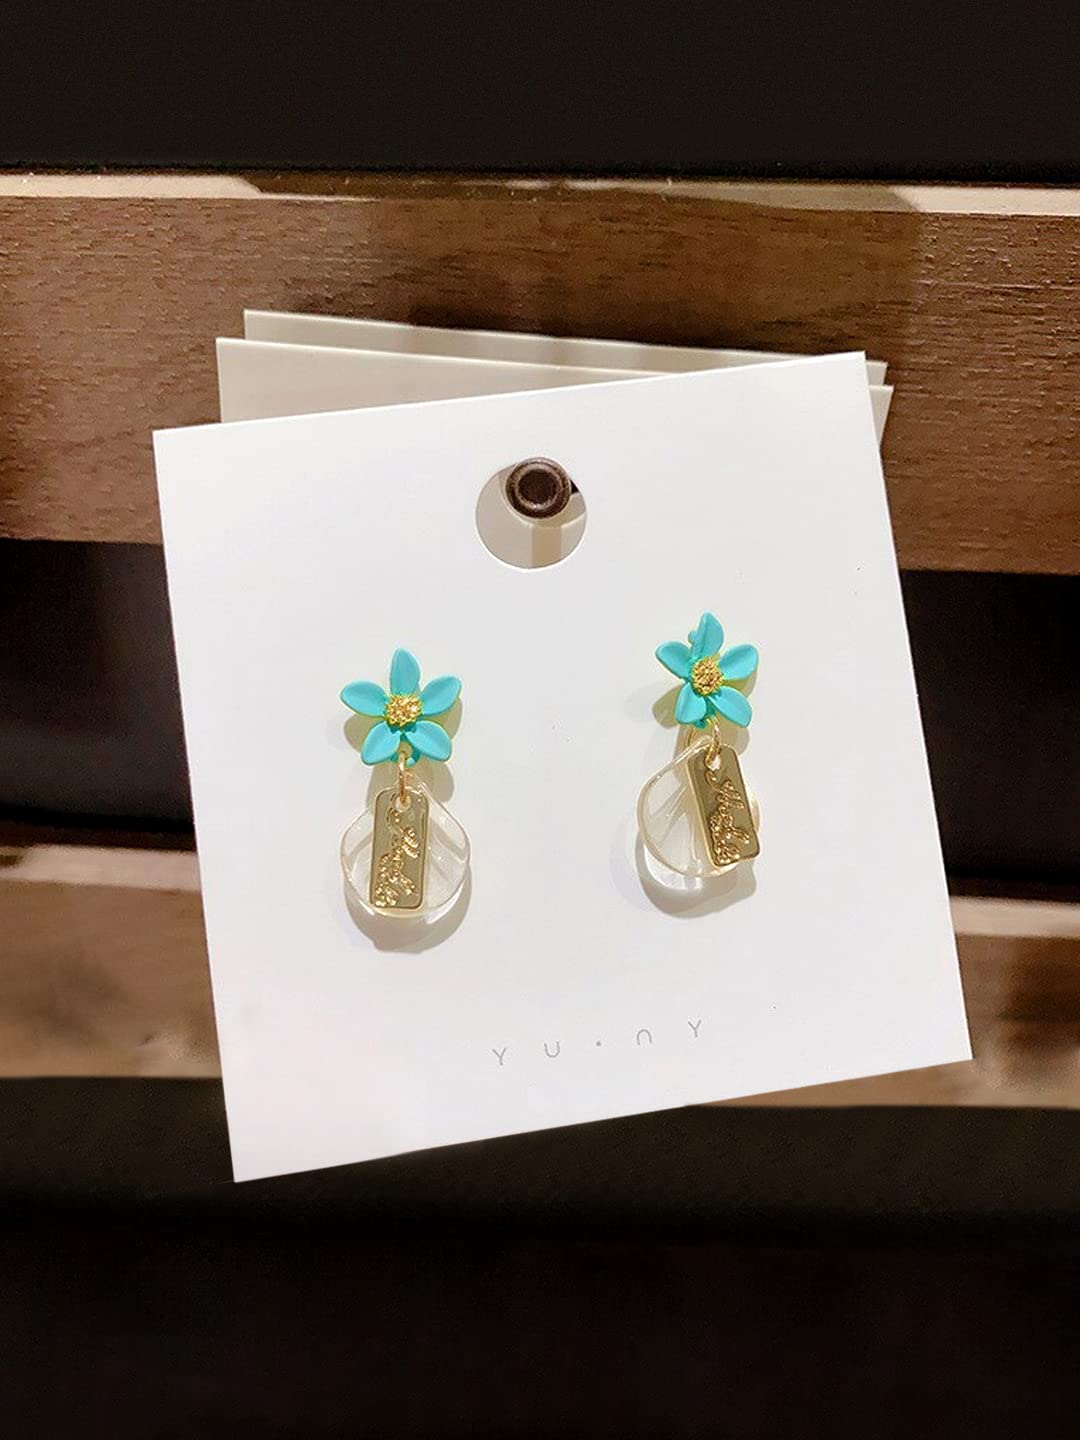 Yellow Chimes Earrings for Women and Girls Drop Earrings for Girls | Gold Toned Blue Floral Designed Drop Designed Drop Earrings | Birthday Gift for girls and women Anniversary Gift for Wife